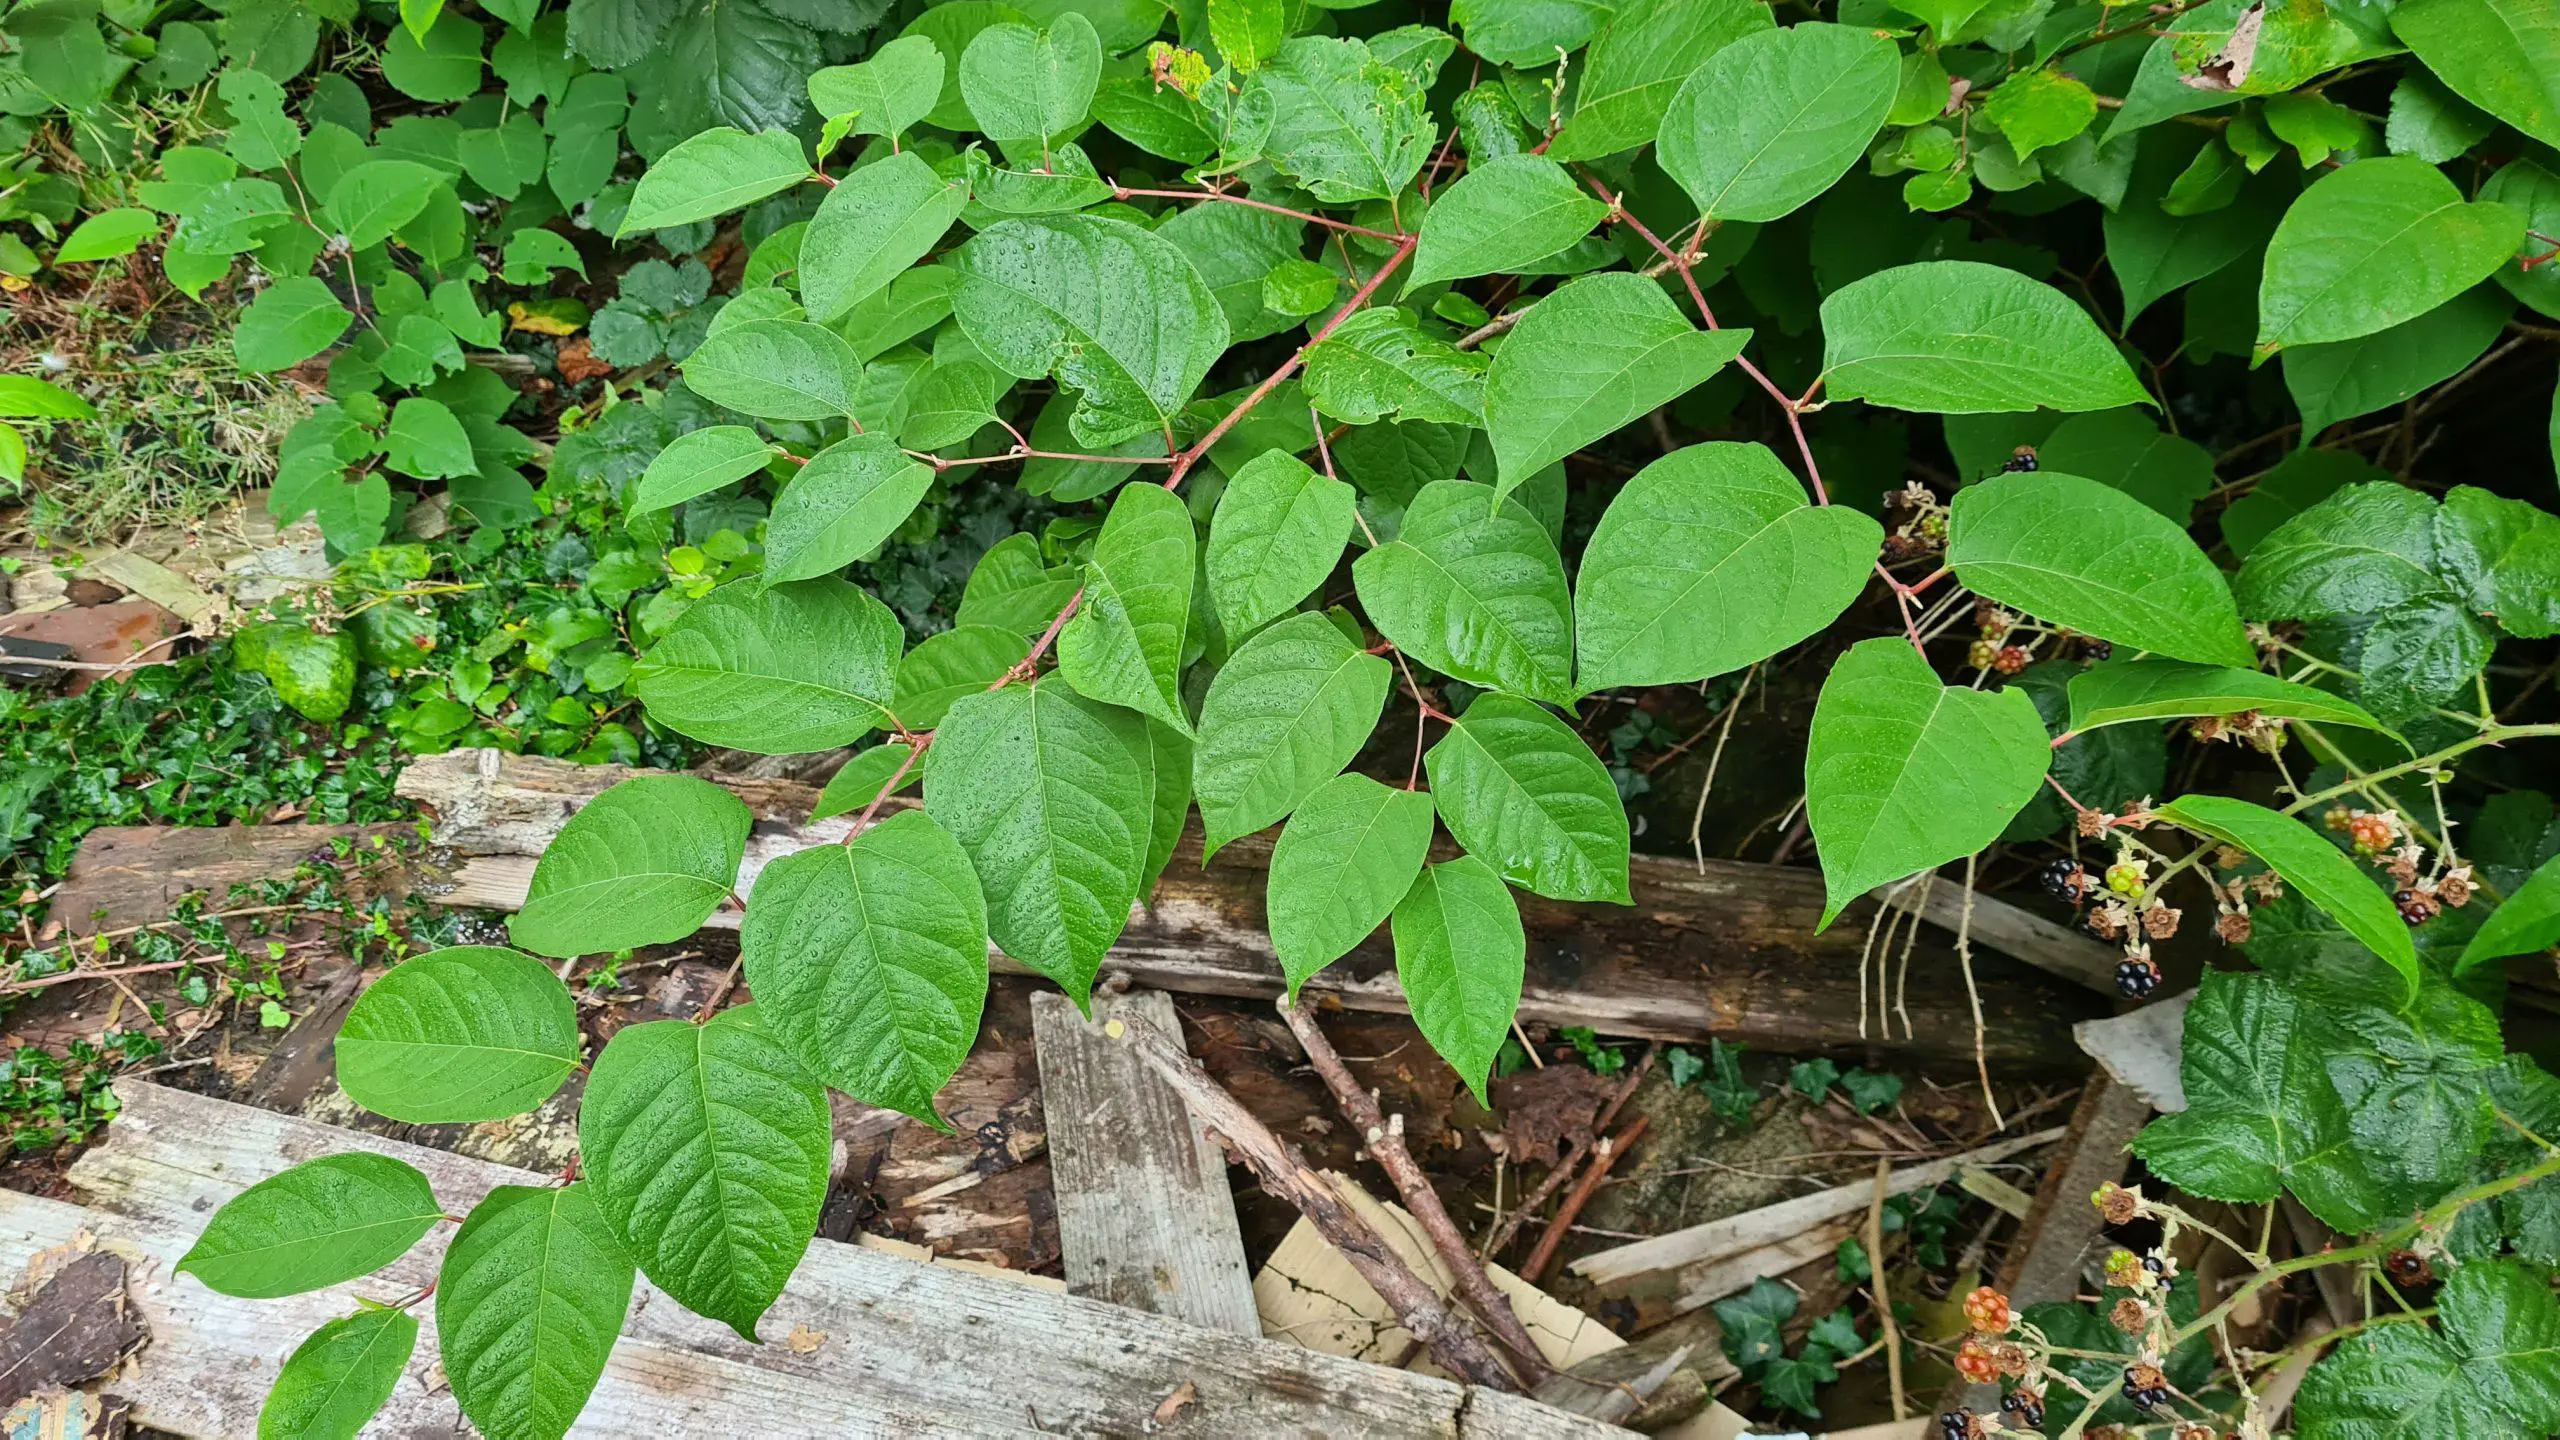 The lush green leaves of Japanese knotweed covering a vast amount of ground cover